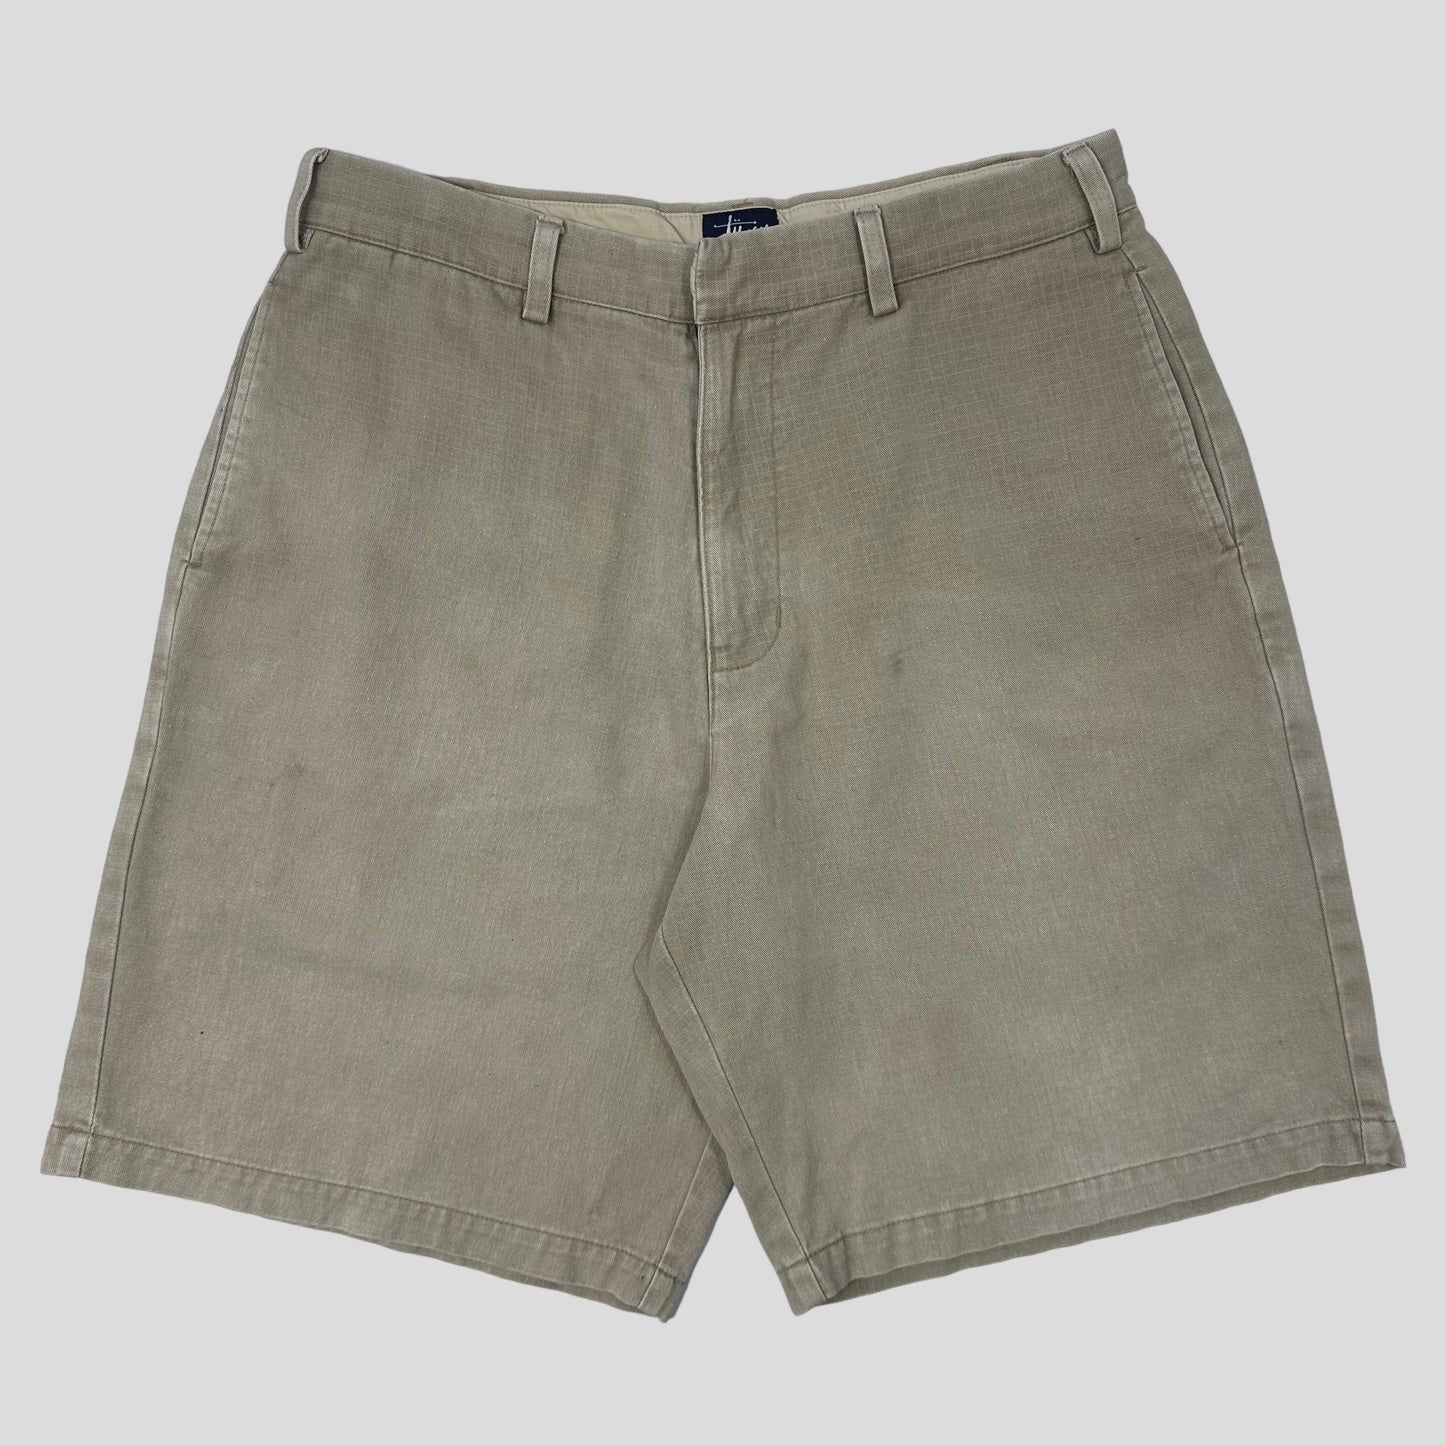 Stussy 90’s Made in USA Ripstop Shorts - 34 - Known Source